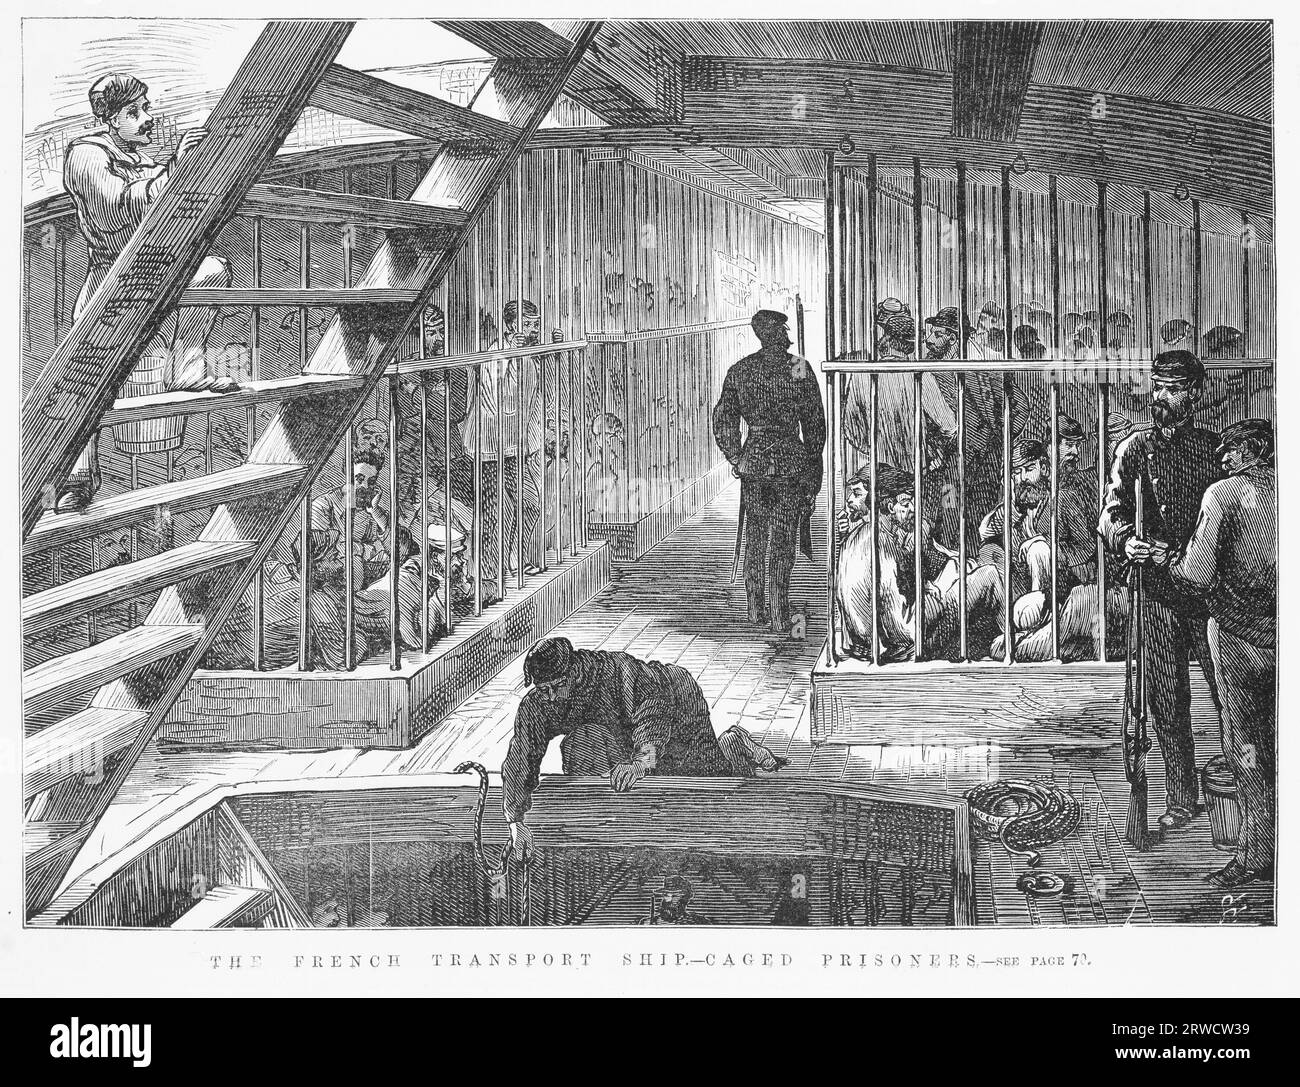 Communist French exiles in cages, on route to New Caledonia. by engraver. Samuel Calvert 1828-1913. May 20, 1873. Stock Photo